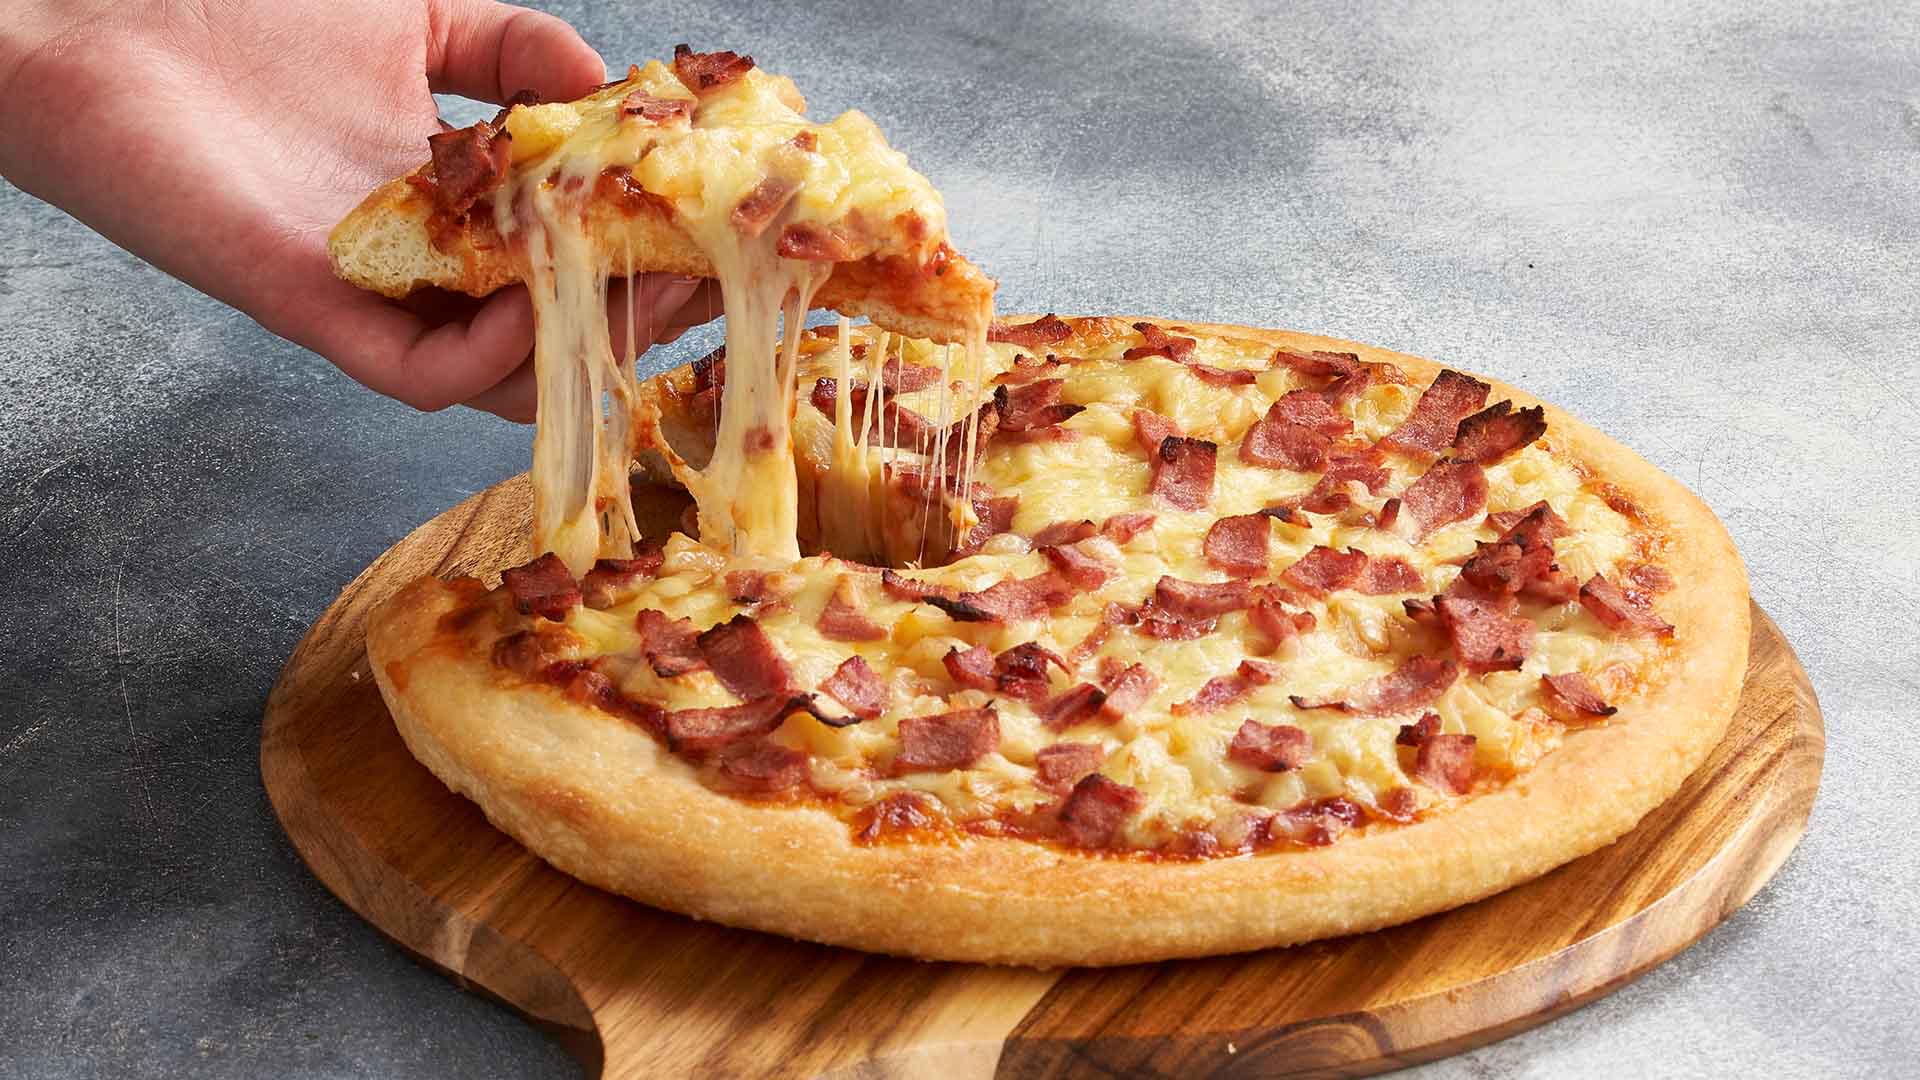 Pizza Hut Is Giving Away Up to 285,000 Free Pizzas During This Year's Olympics